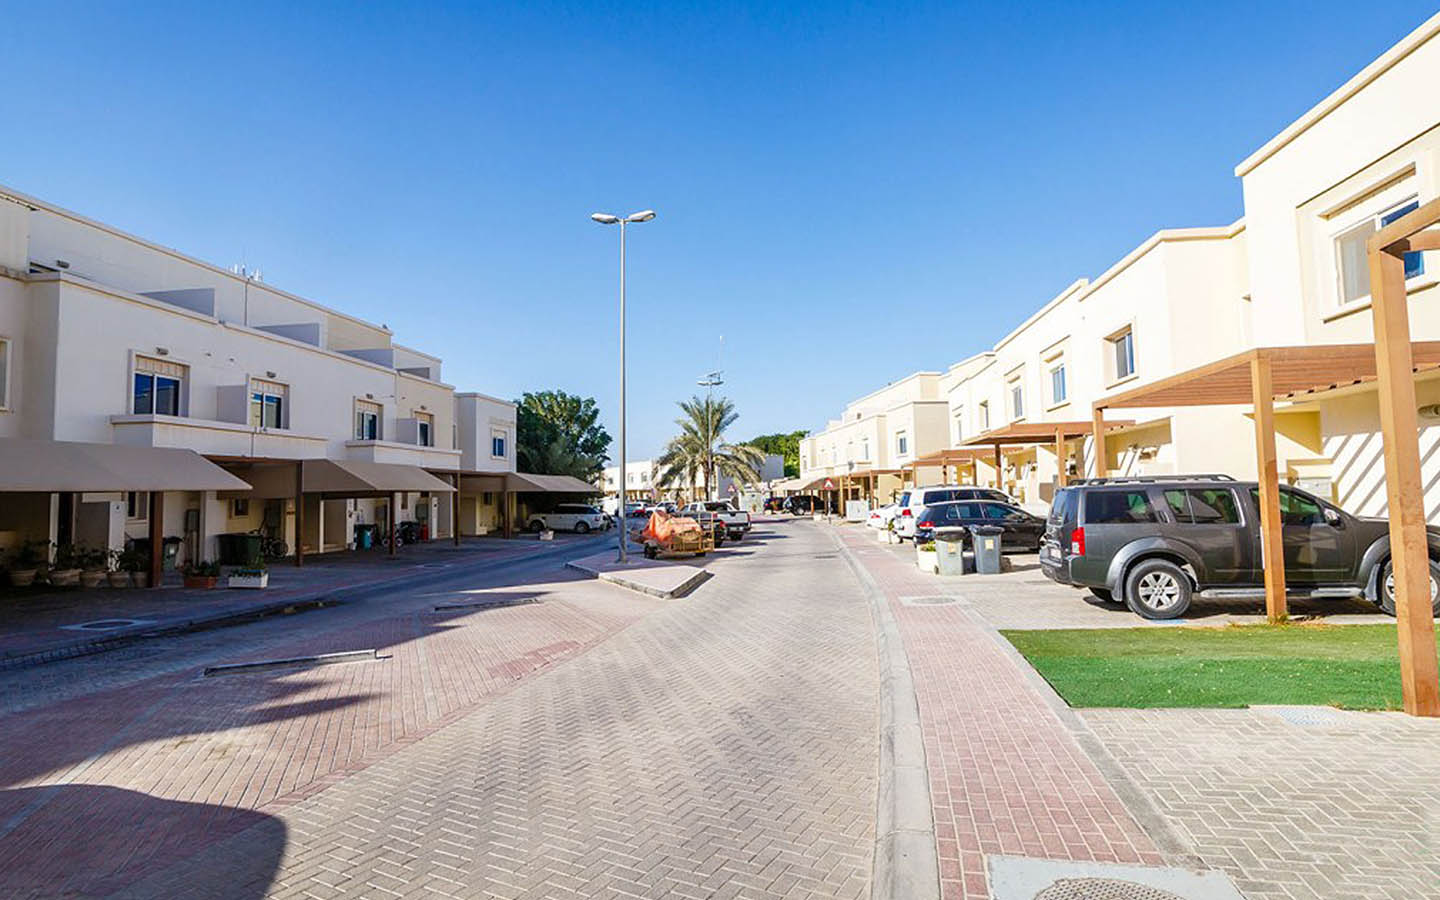 Al Reef is a popular area for buying affordable apartments in the 2023 Abu Dhabi sales market report